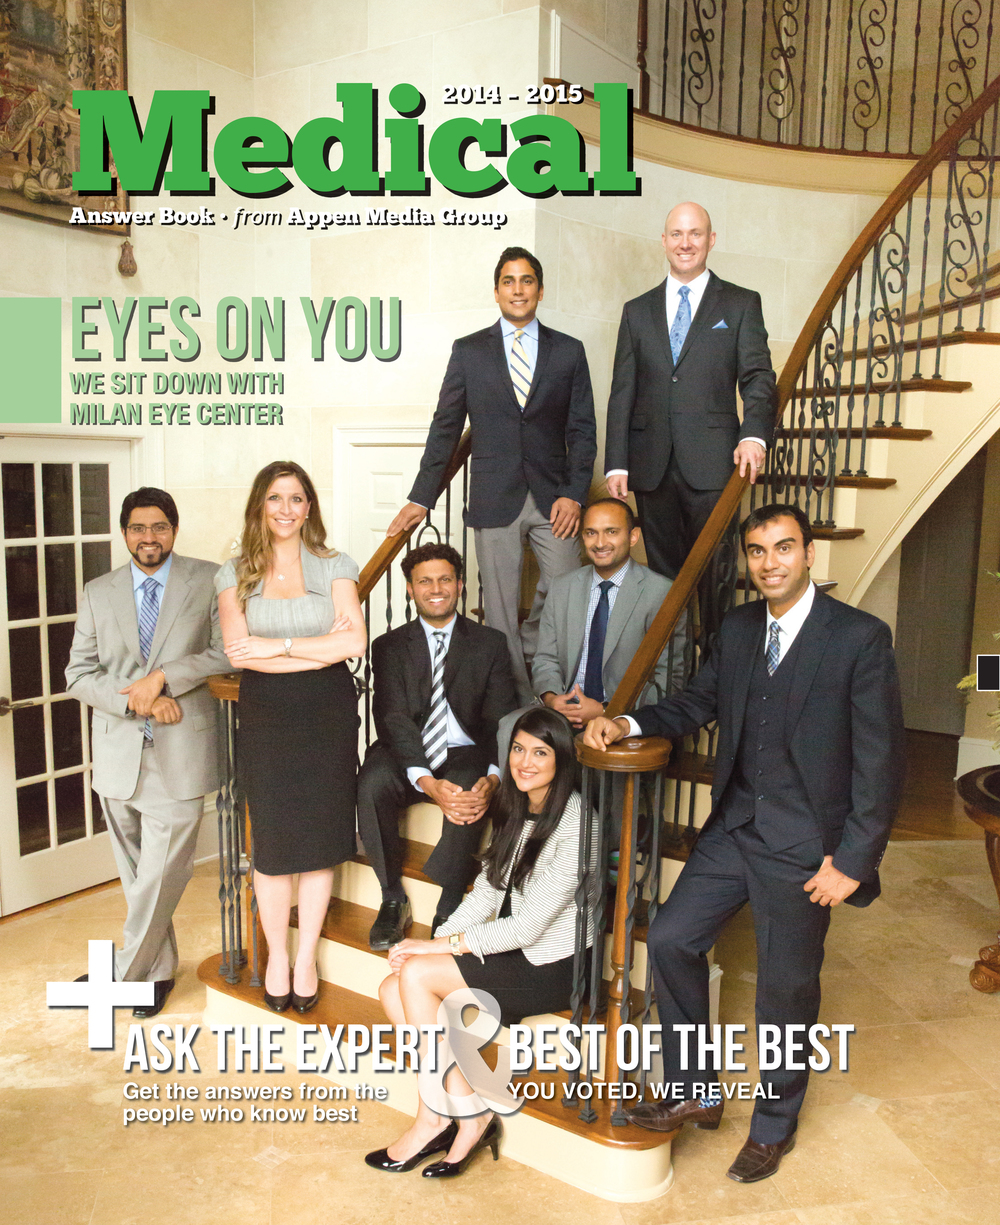  The time I brought Milan Eye Center to a friend's house and shot the cover of Medical Answer Book. Thanks again Kelly Stoks!  